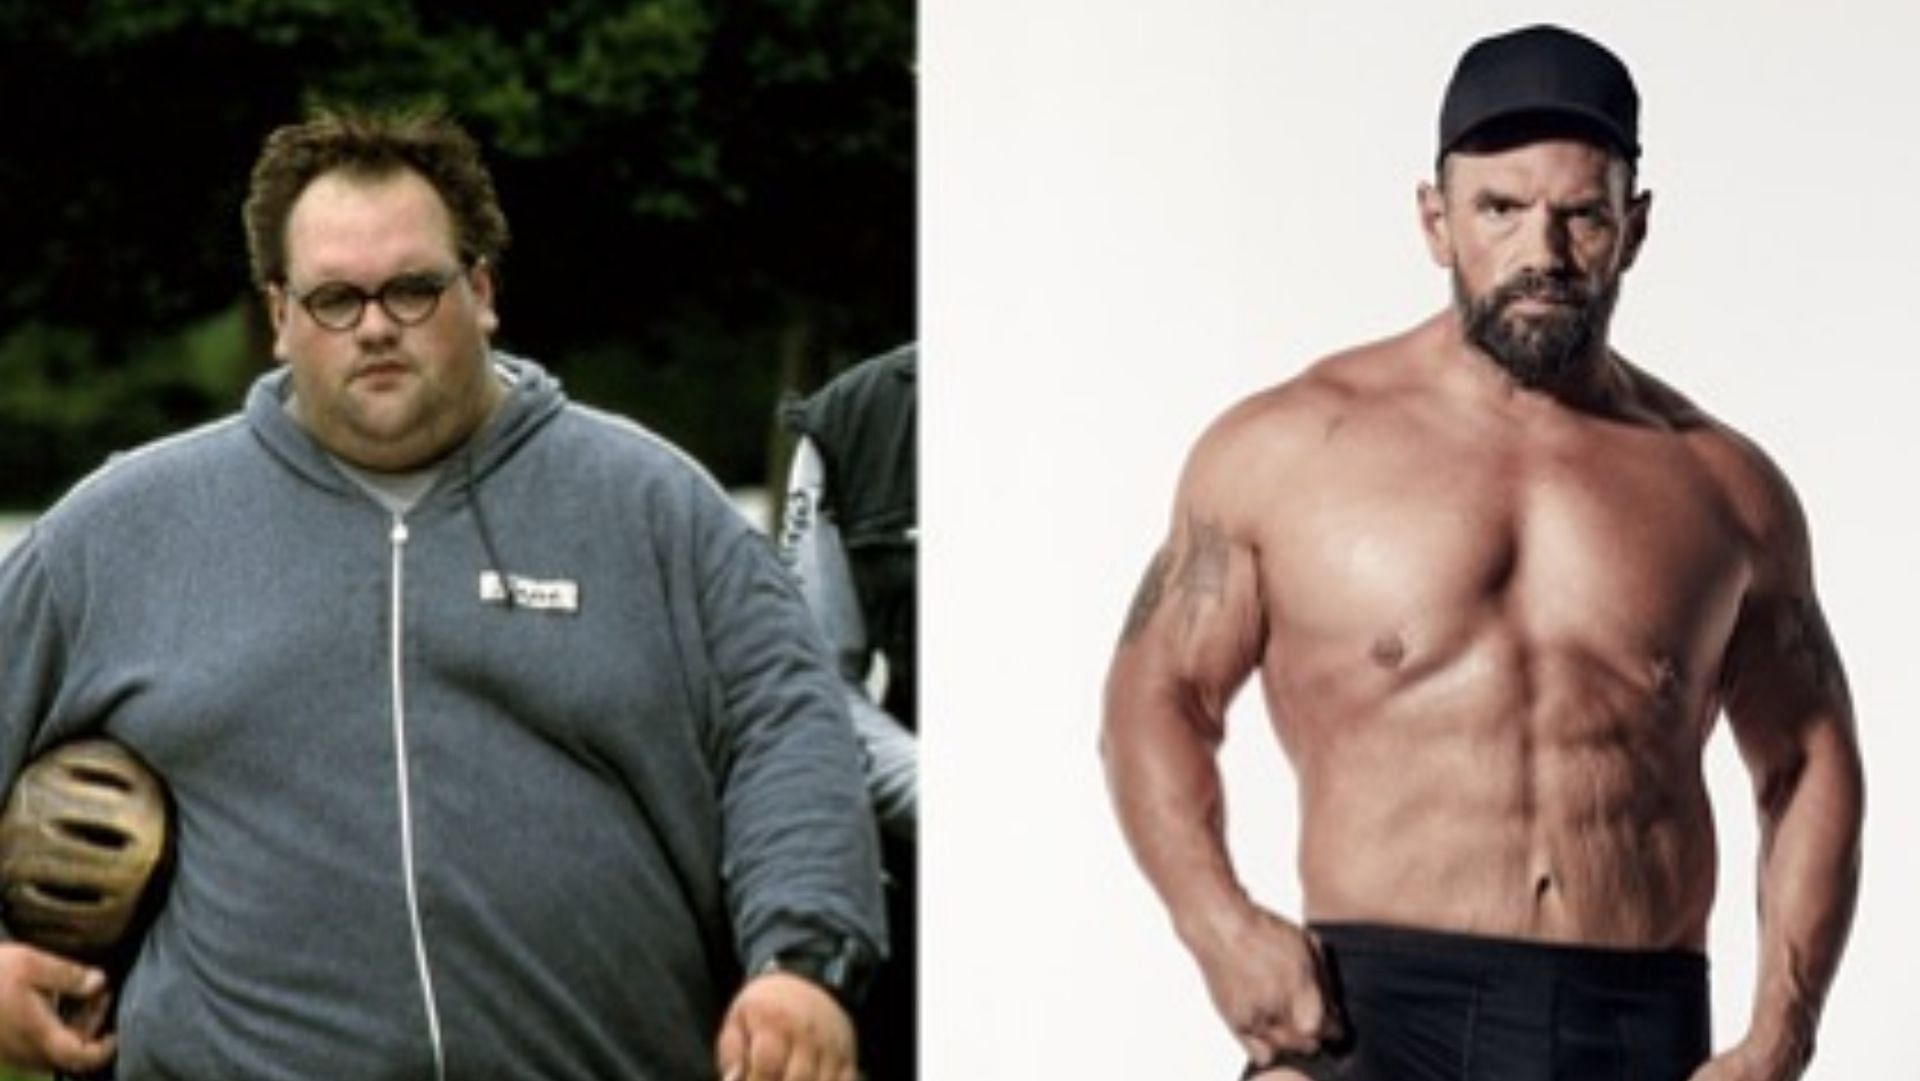 Ethan Suplee managed to lose 200 pounds through diet and exercise (Image via Instagram)